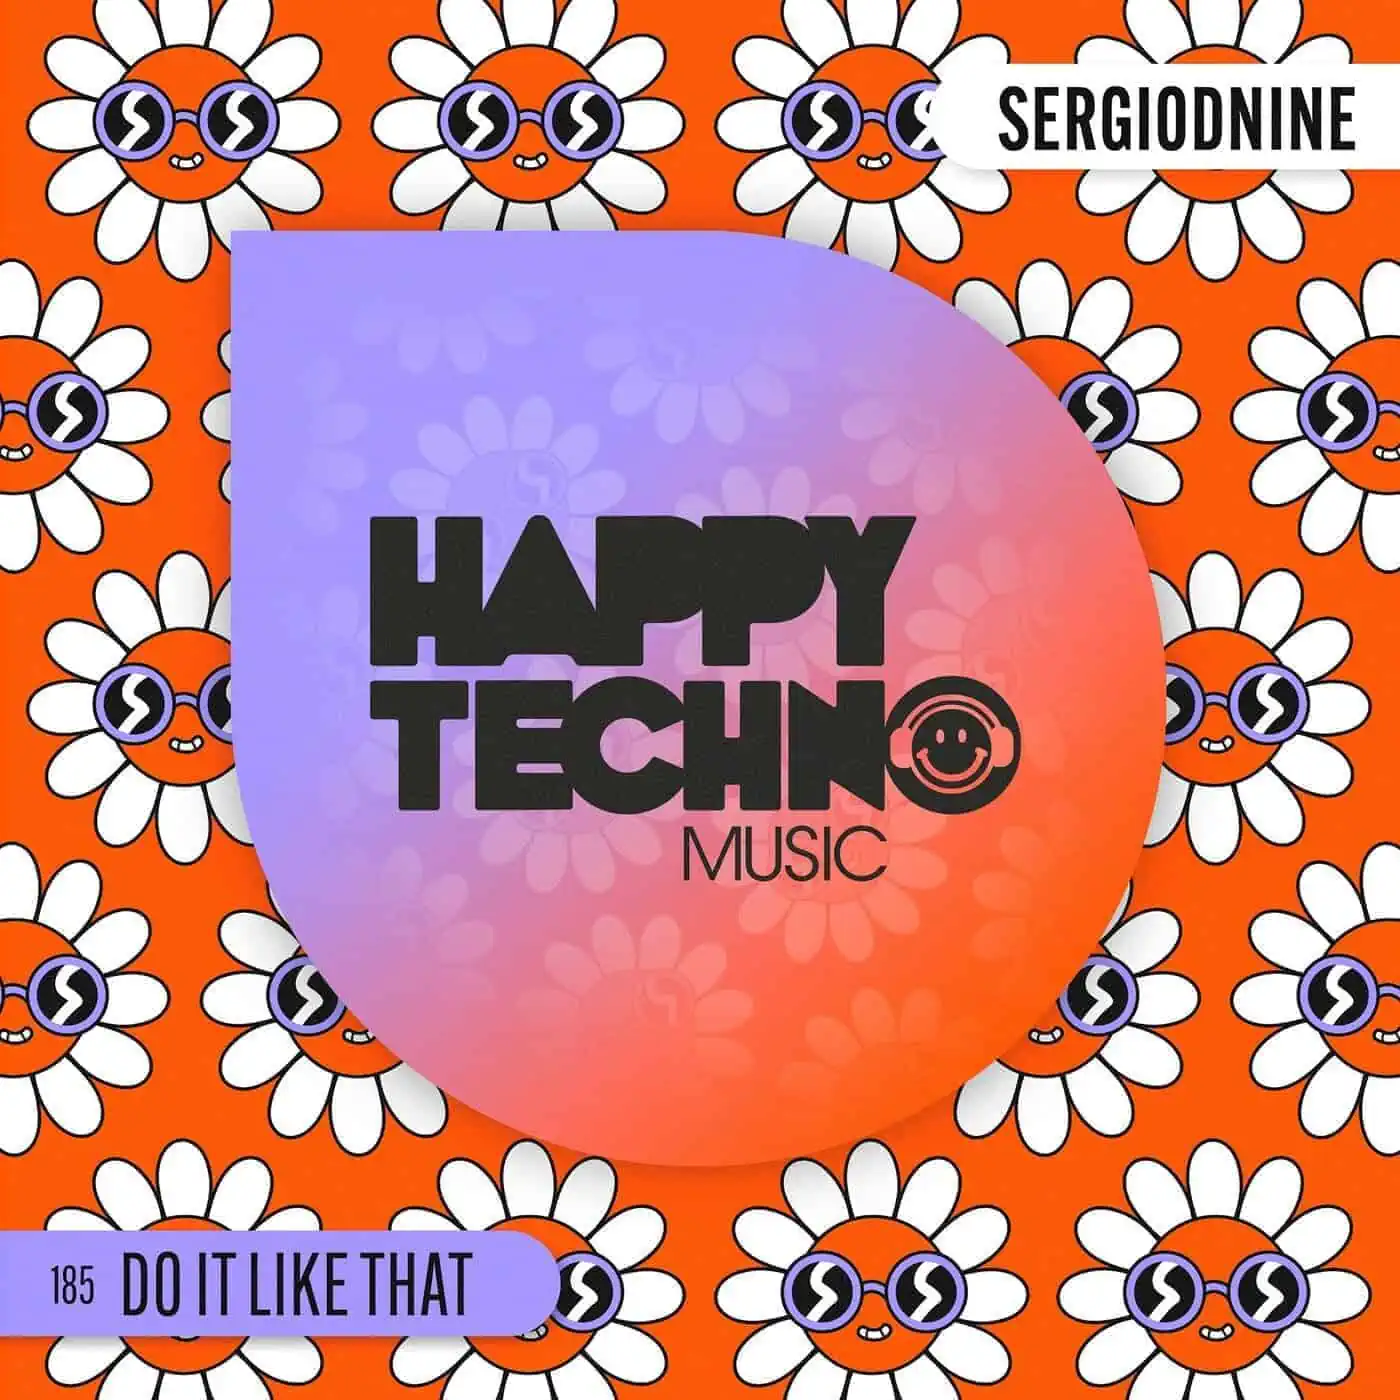 image cover: Do It Like That by Sergiodnine on Happy Techno Music